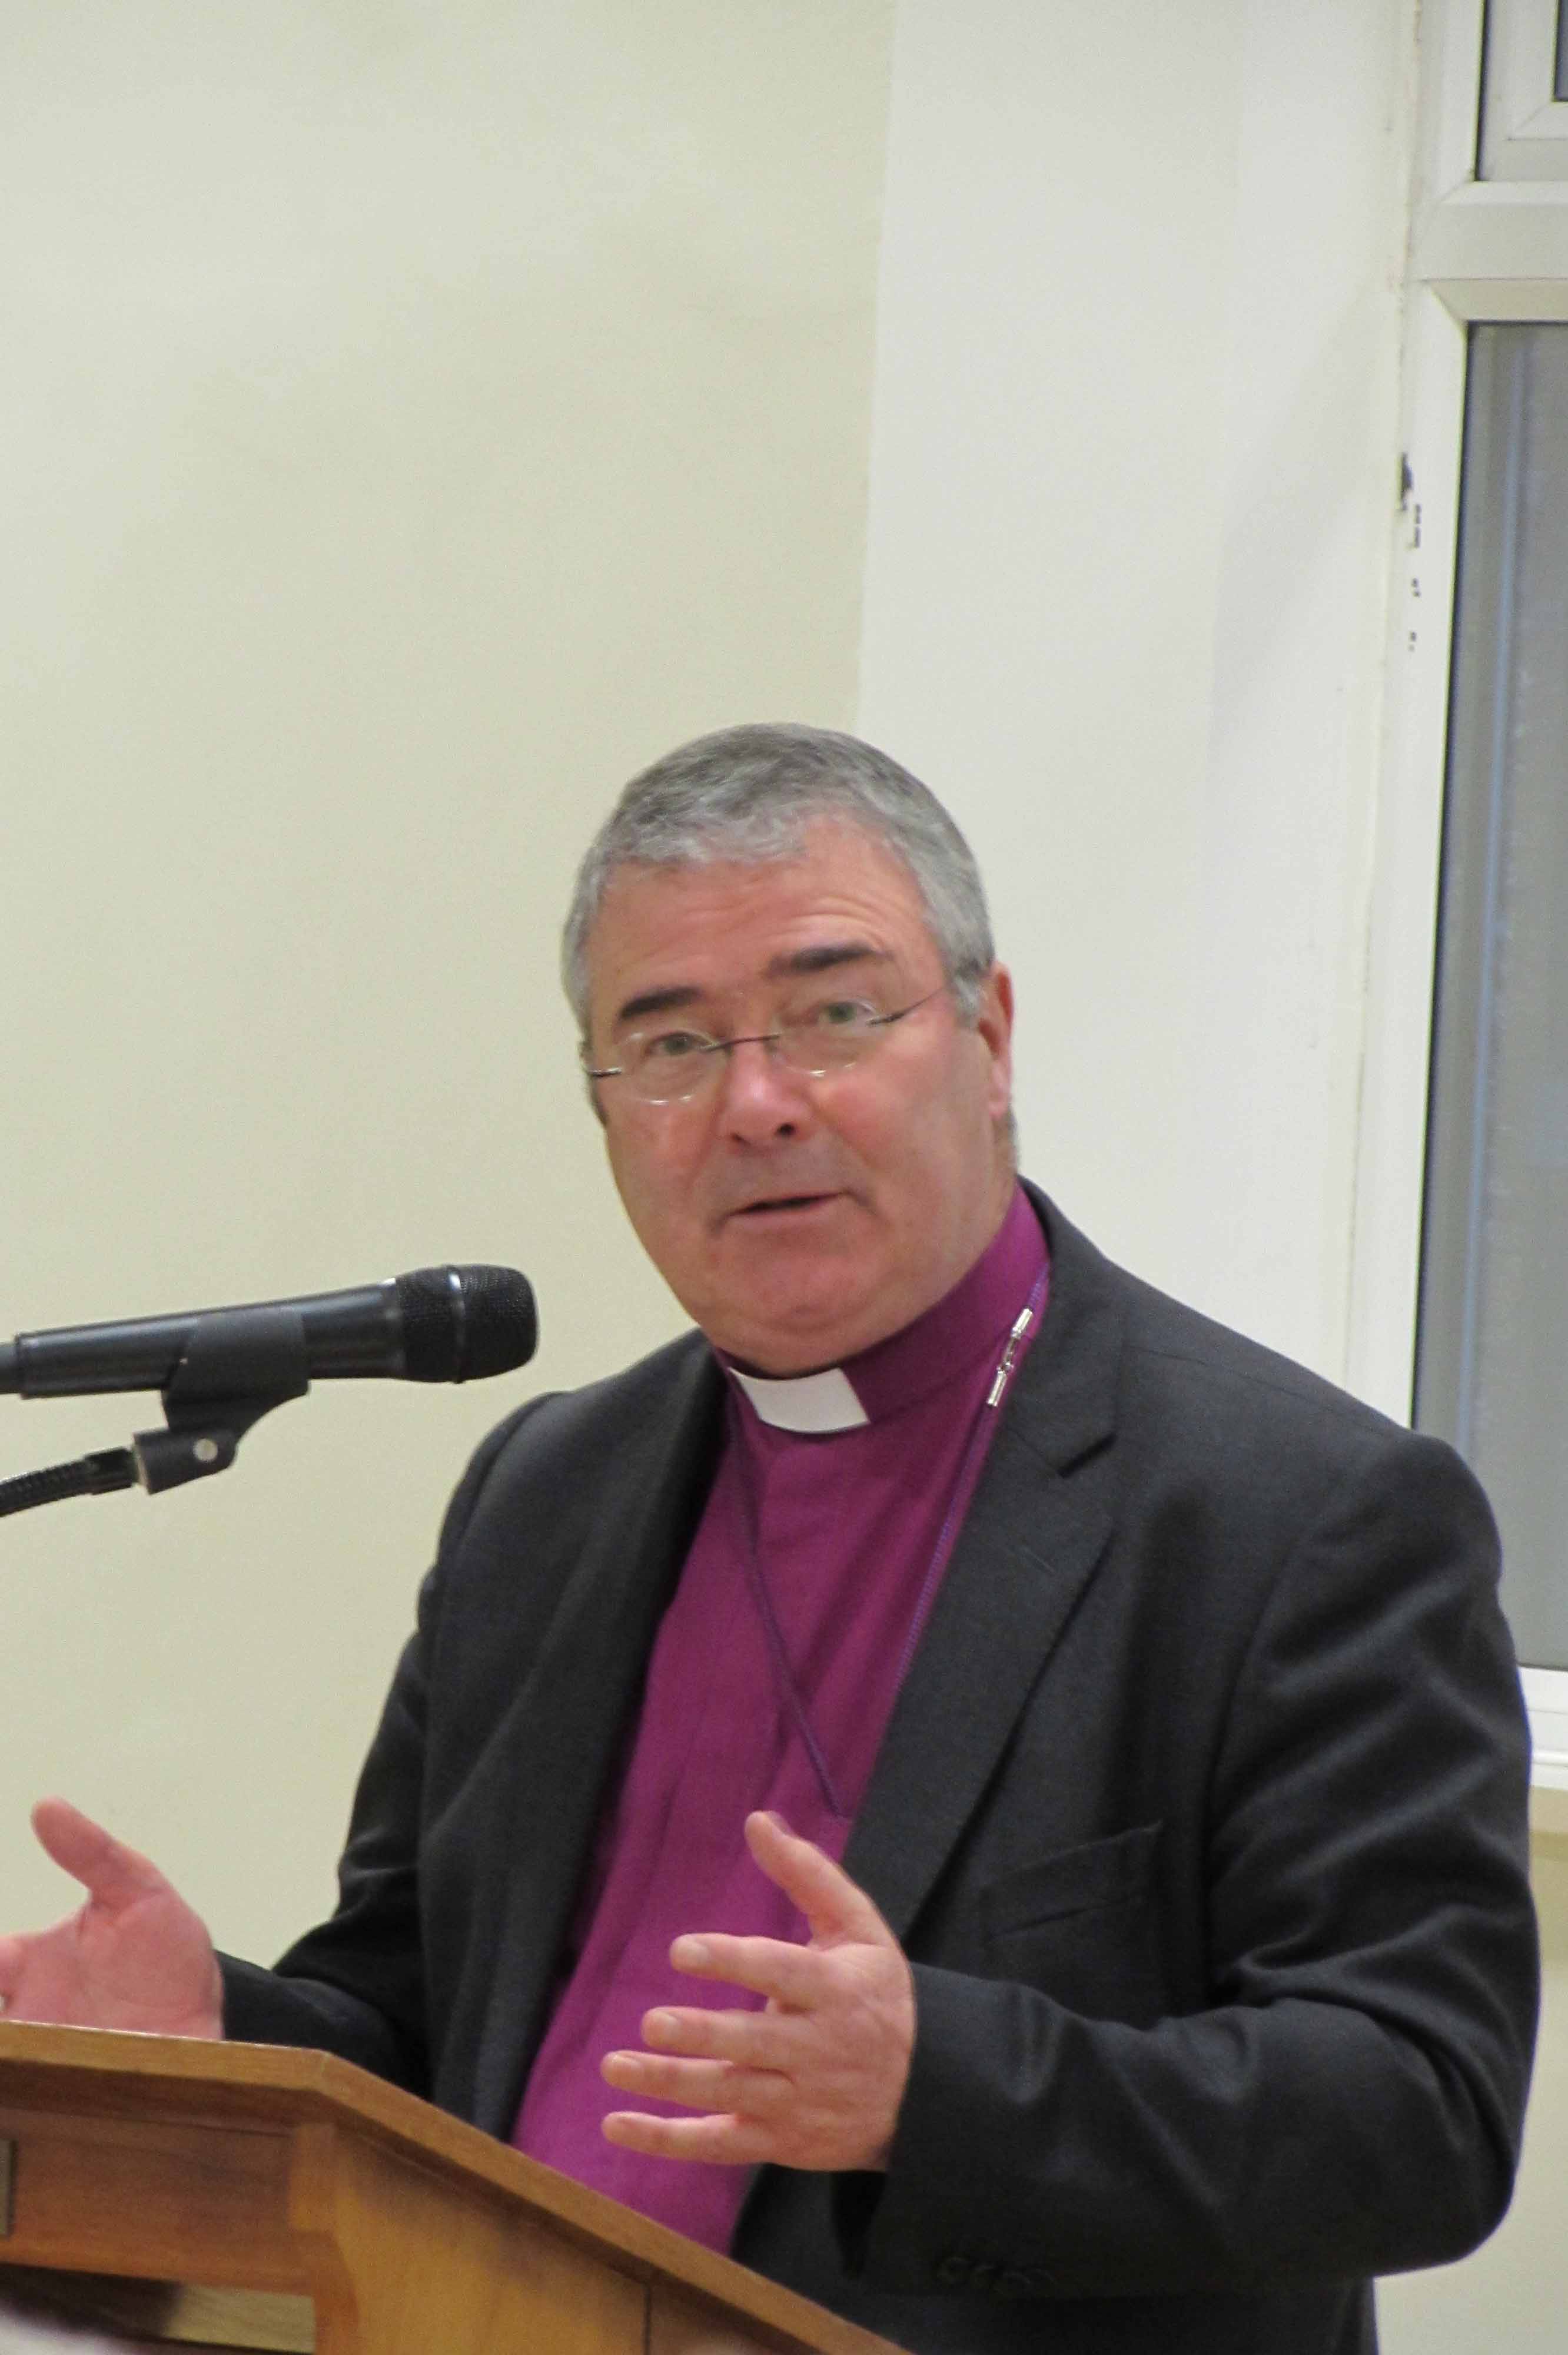 The Bishop of Clogher, the Right Revd John McDowell, giving his Presidential Address at the Diocesan Synod on Thursday, 27th September 2018.